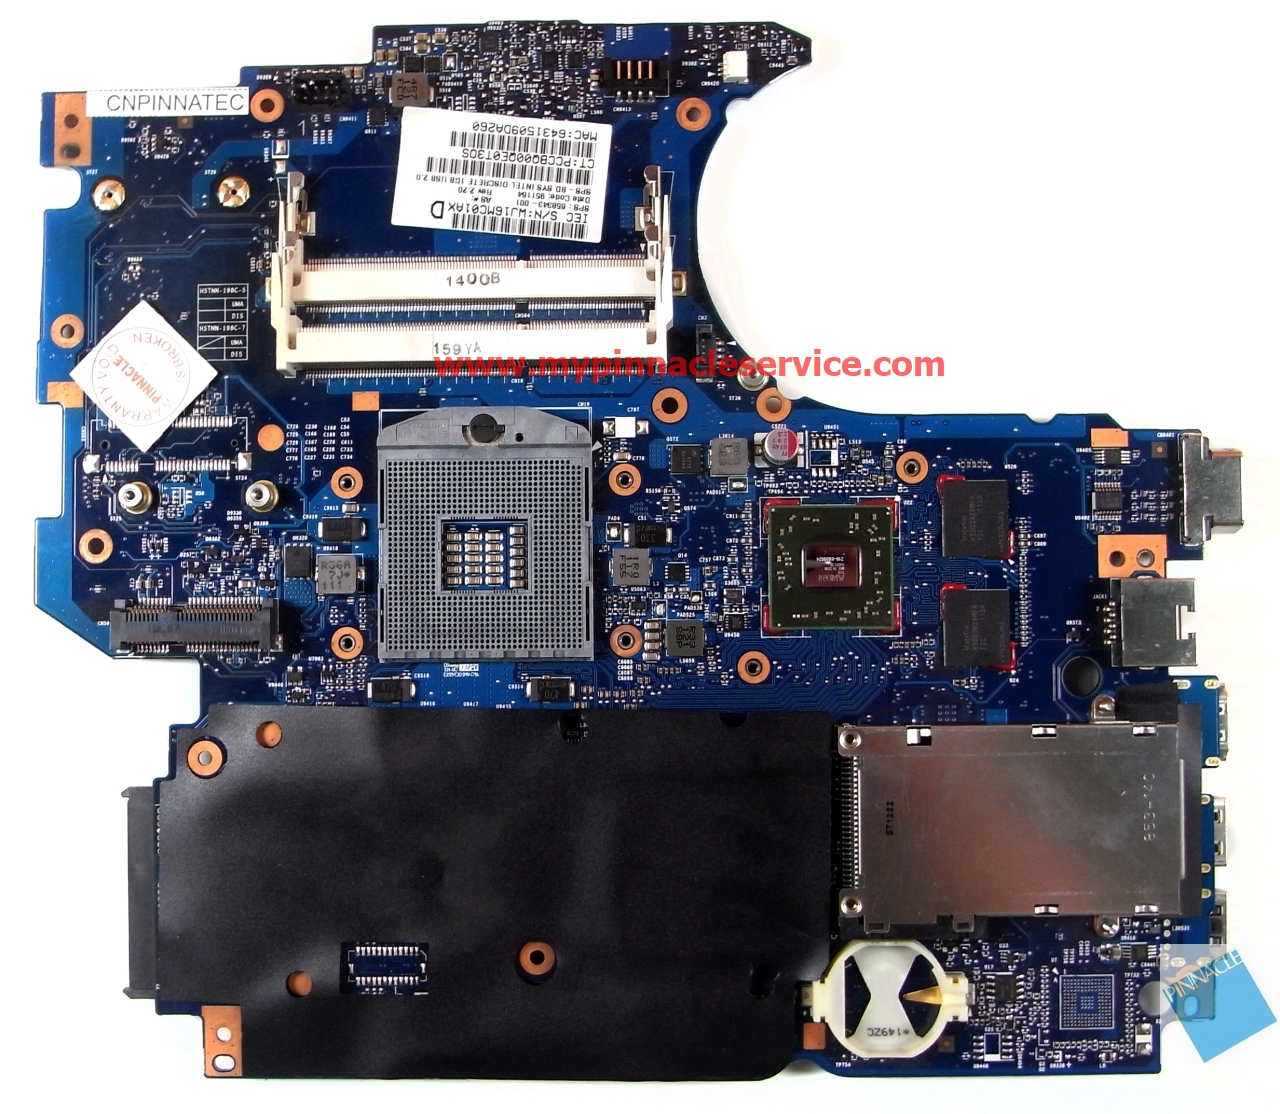 670795-001-658343-001-motherboard-for-hp-probook-4530s-4730s-6050a2465501-r0012742.jpg